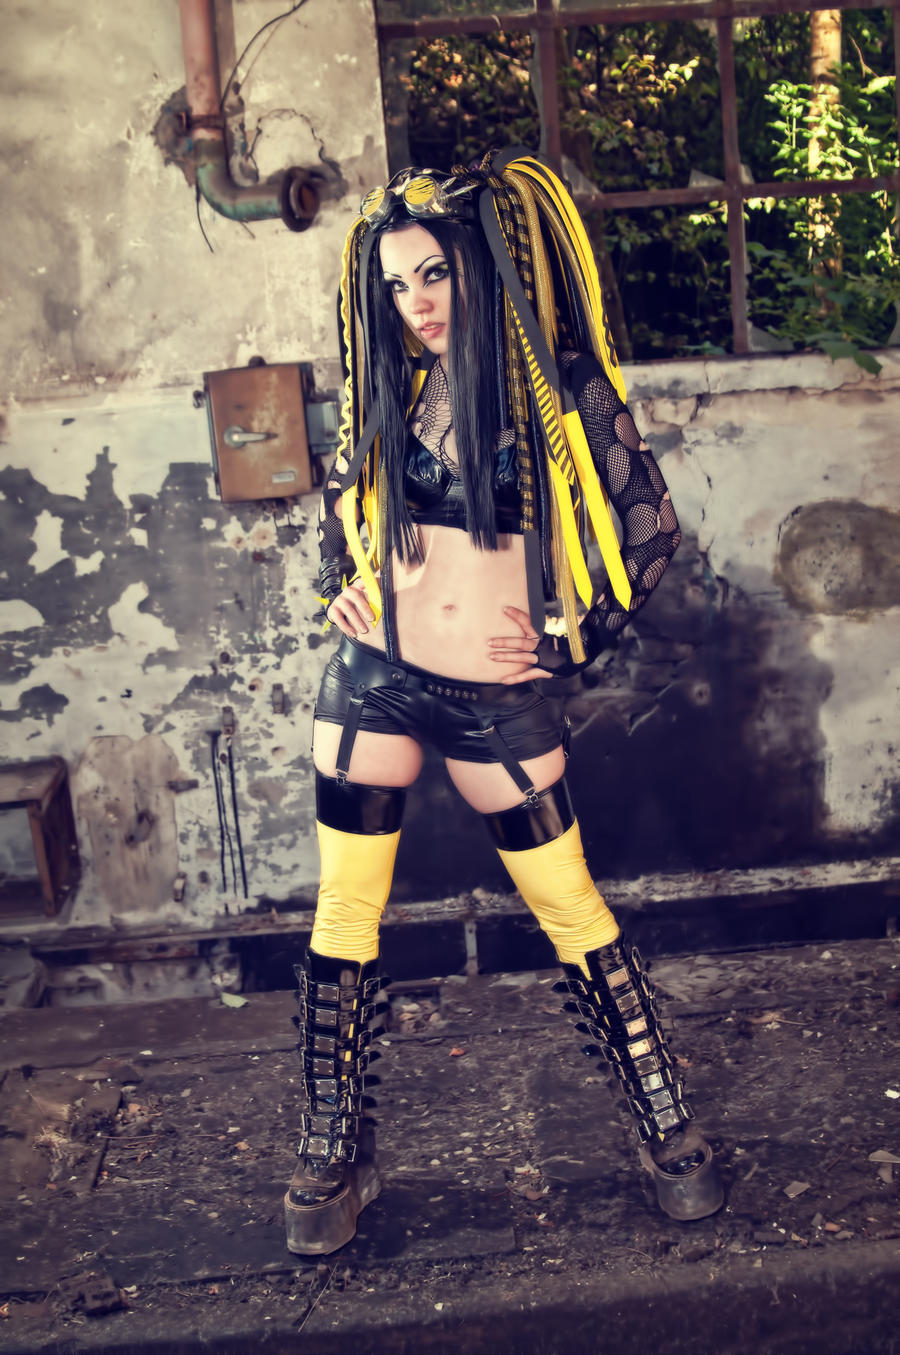 Cyberinvation in Yellow by THETERRORCAT